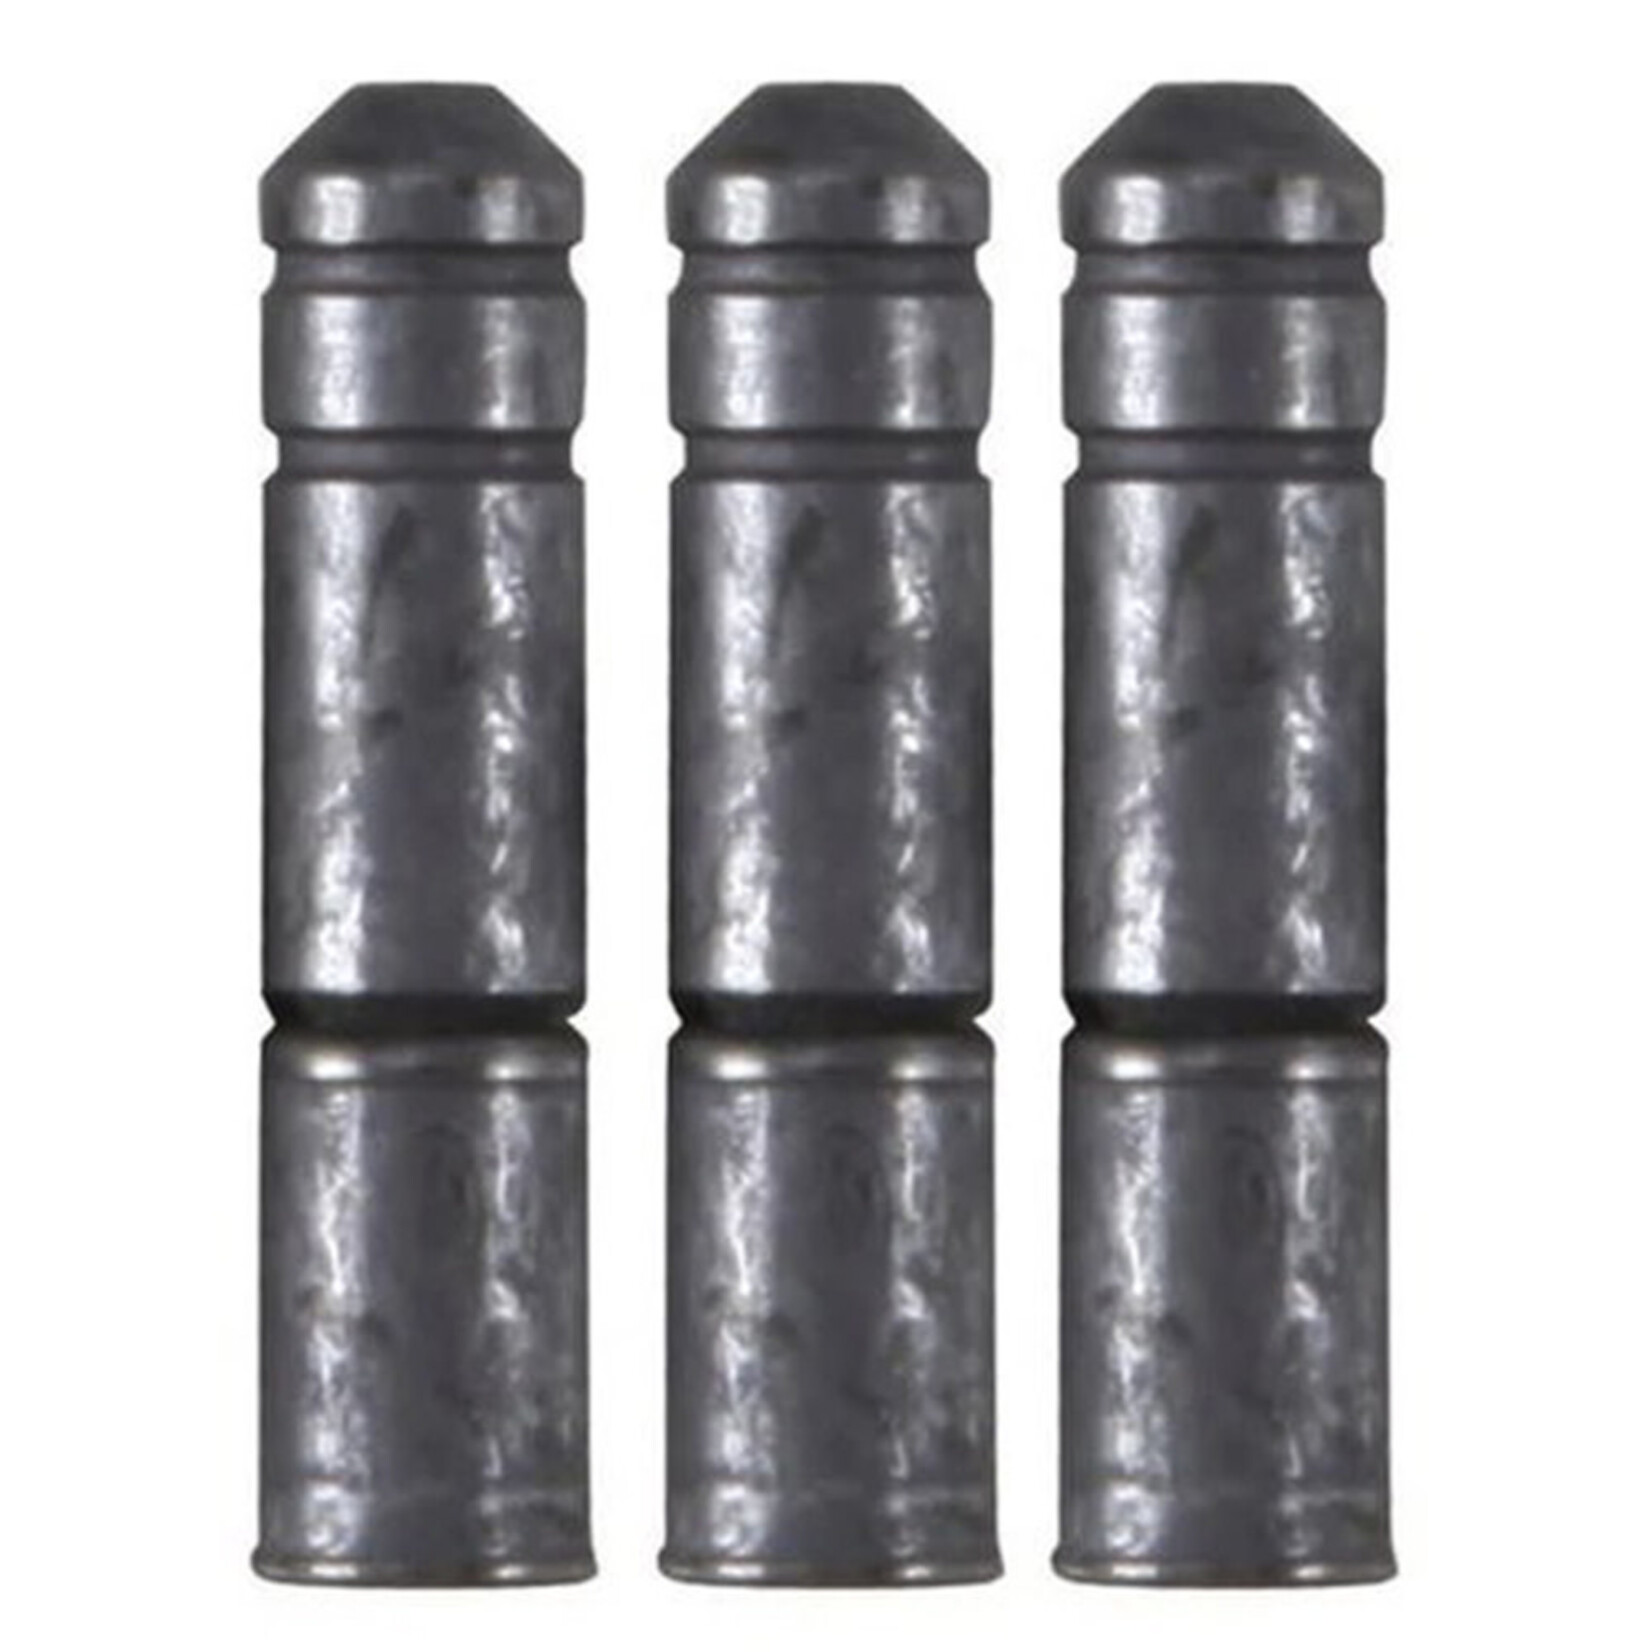 SHIMANO Chain Connecting Pins - 10 Speed - Shimano - 3 Pack